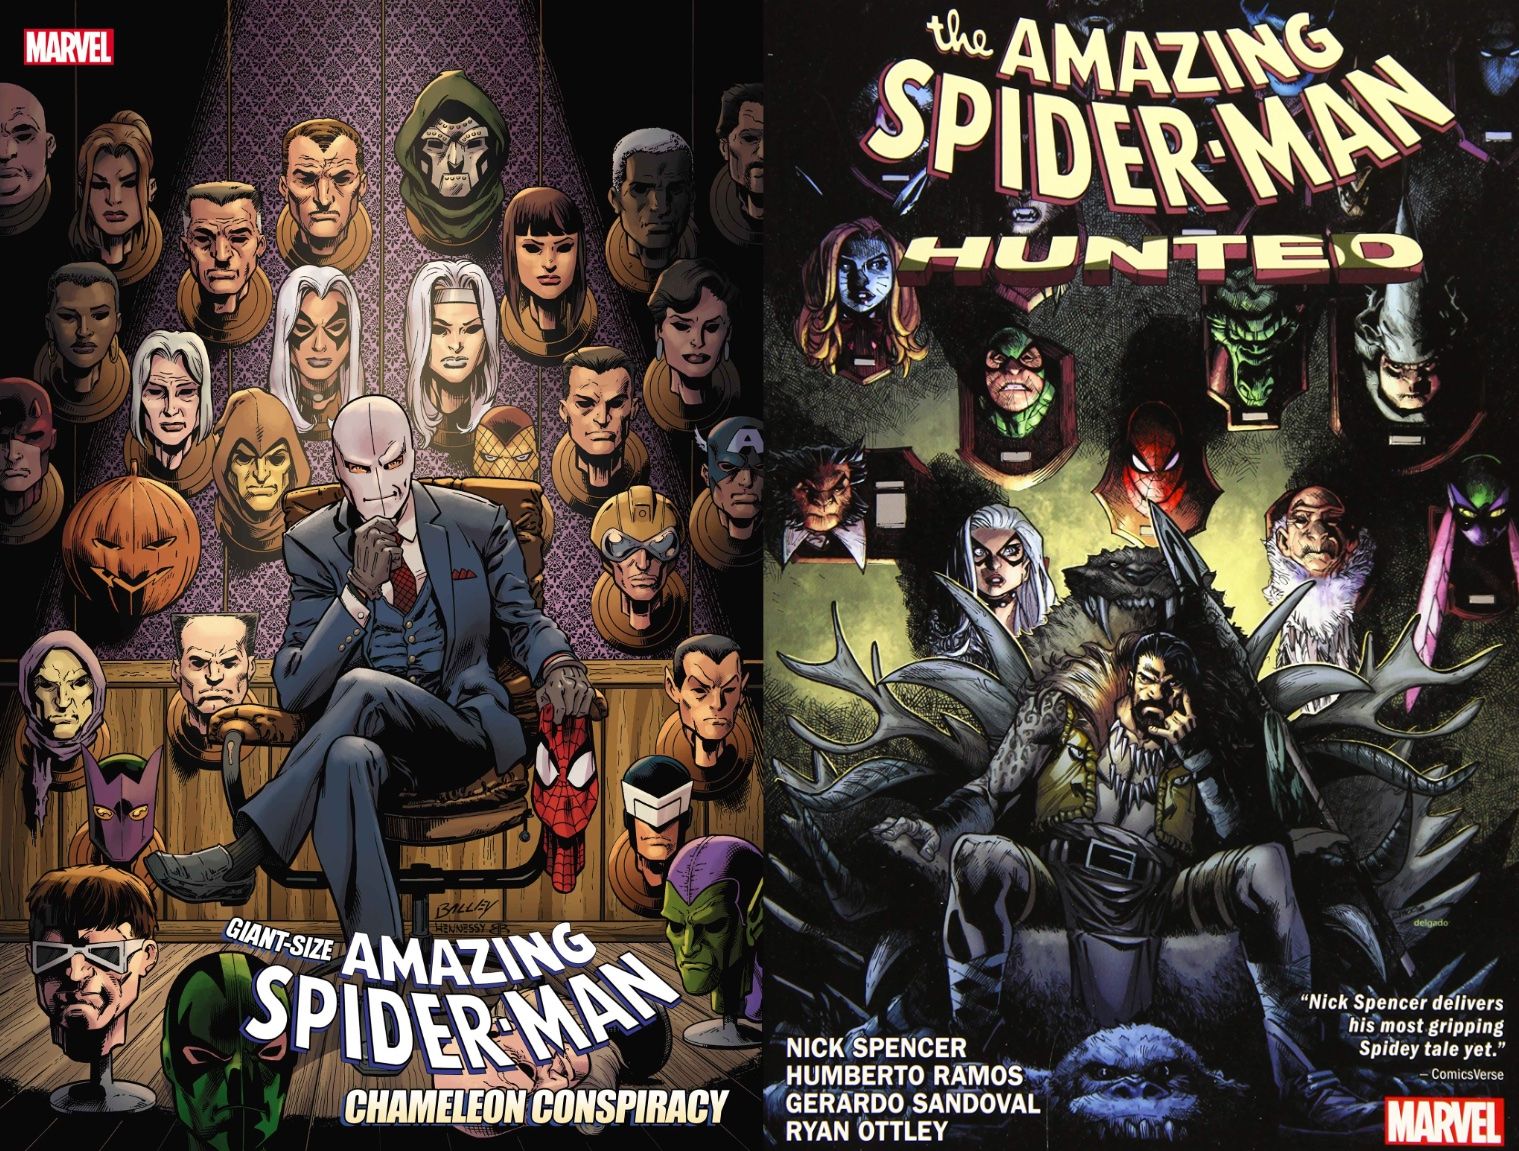 Spider-Man’s Sinister Sibling Villains Get Matching Comic Covers